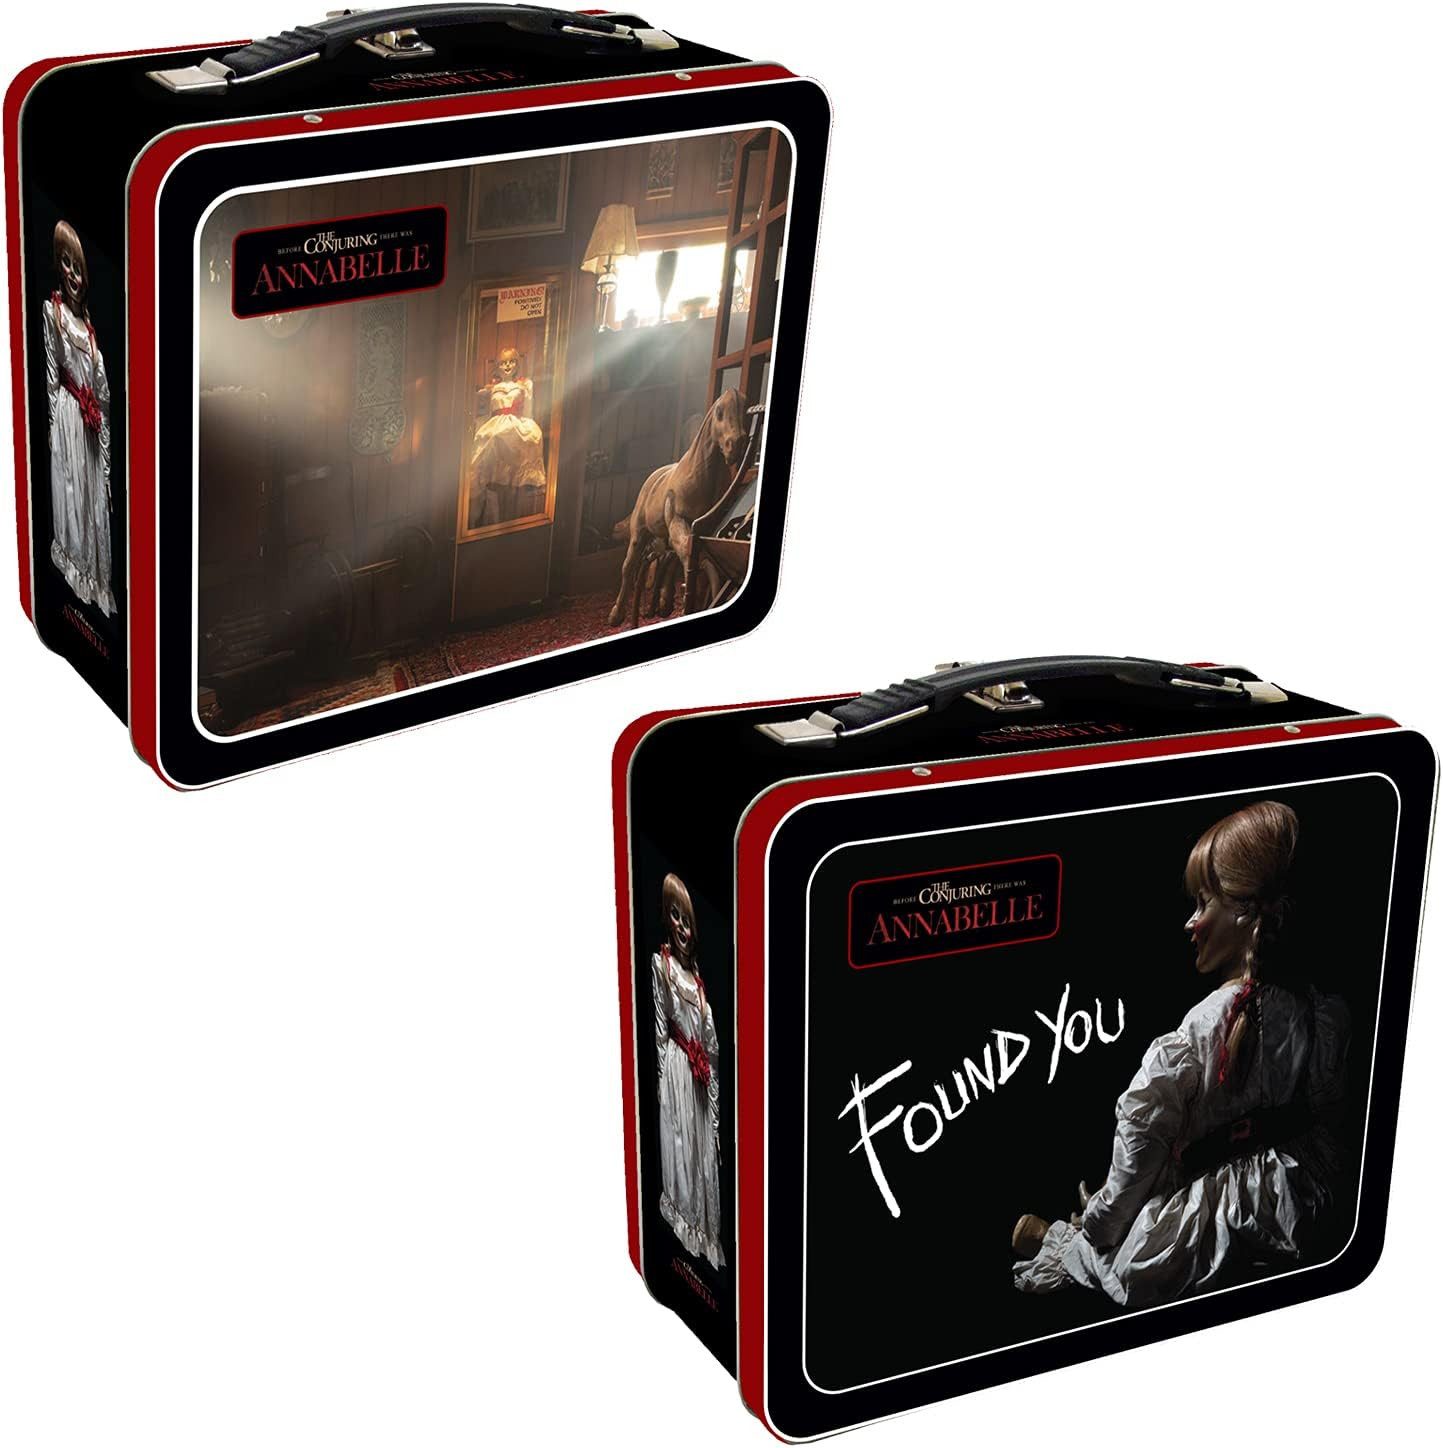 Warner Bros. Lunchbox Lunchbox Annabelle The Conjuring